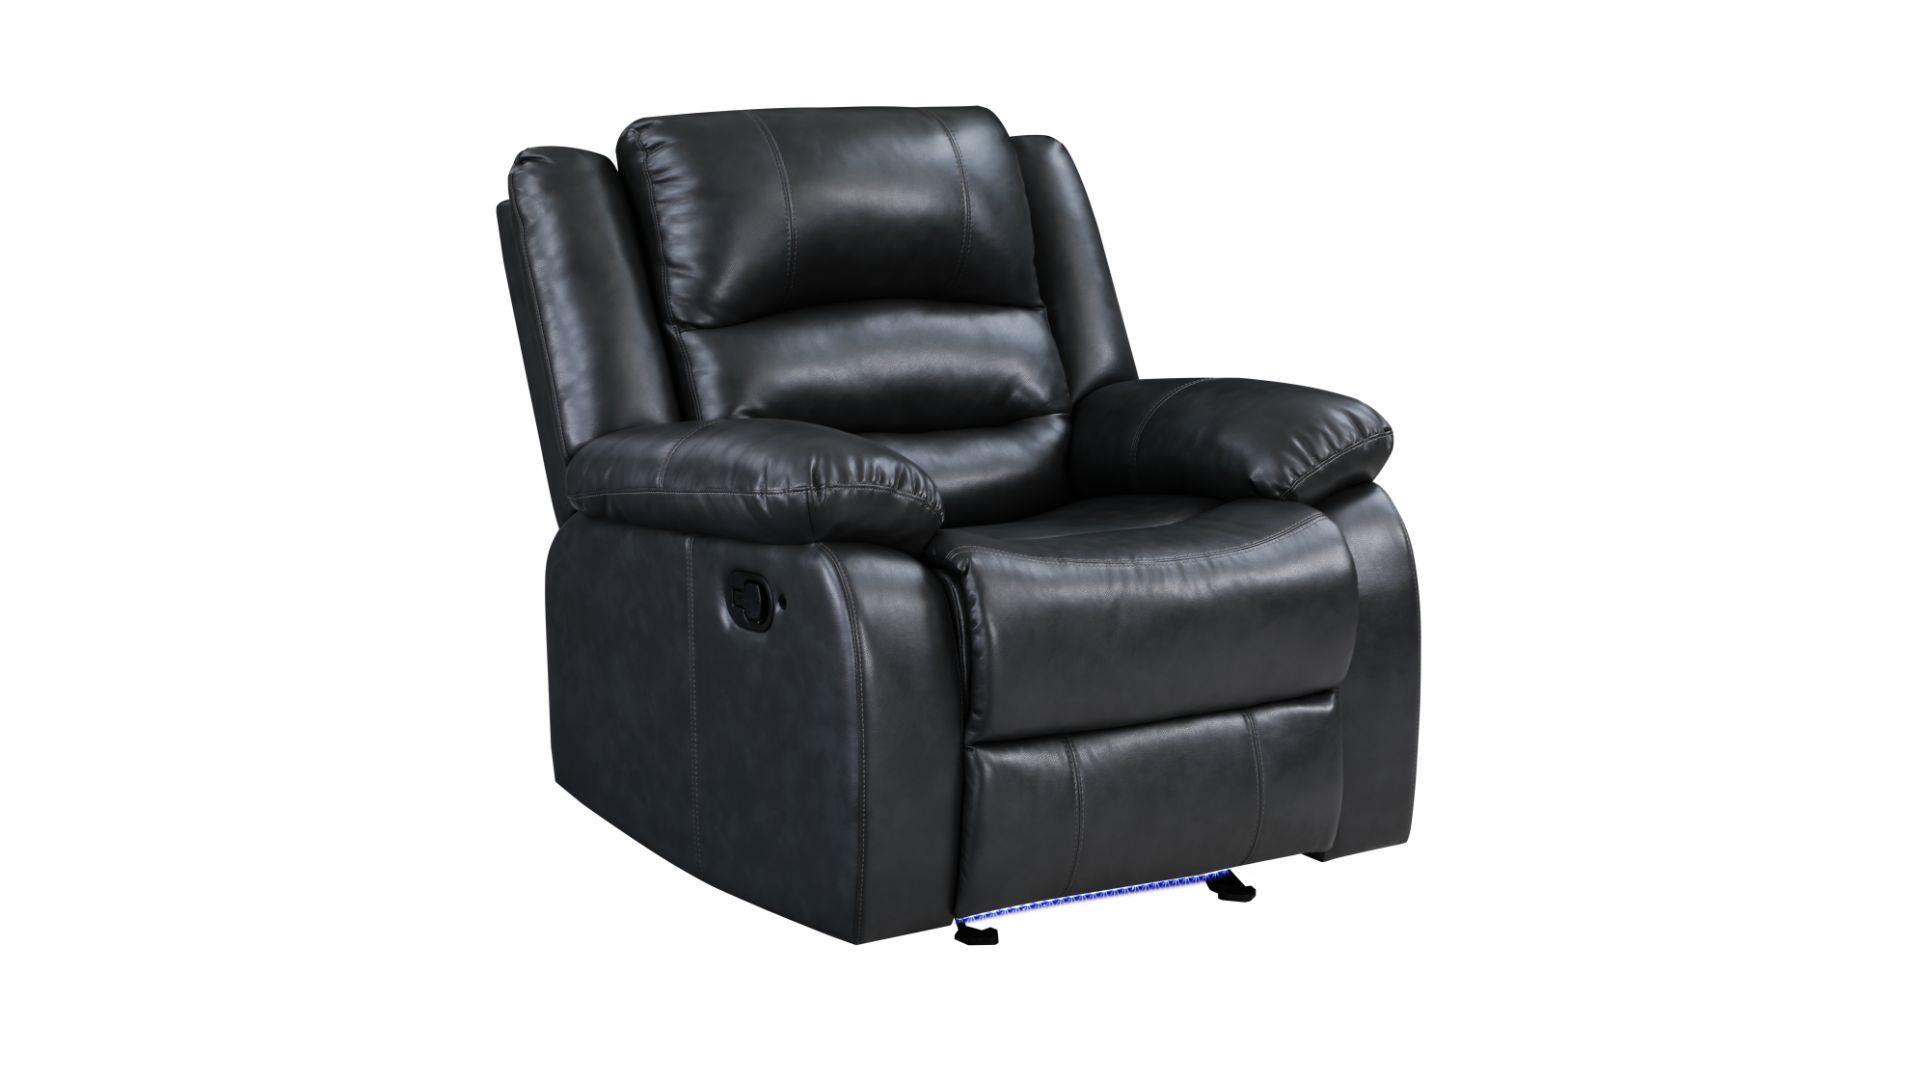 

    
Black Faux Leather Manual Recliner Chair Set 2Pc MARTIN Galaxy Home Contemporary
